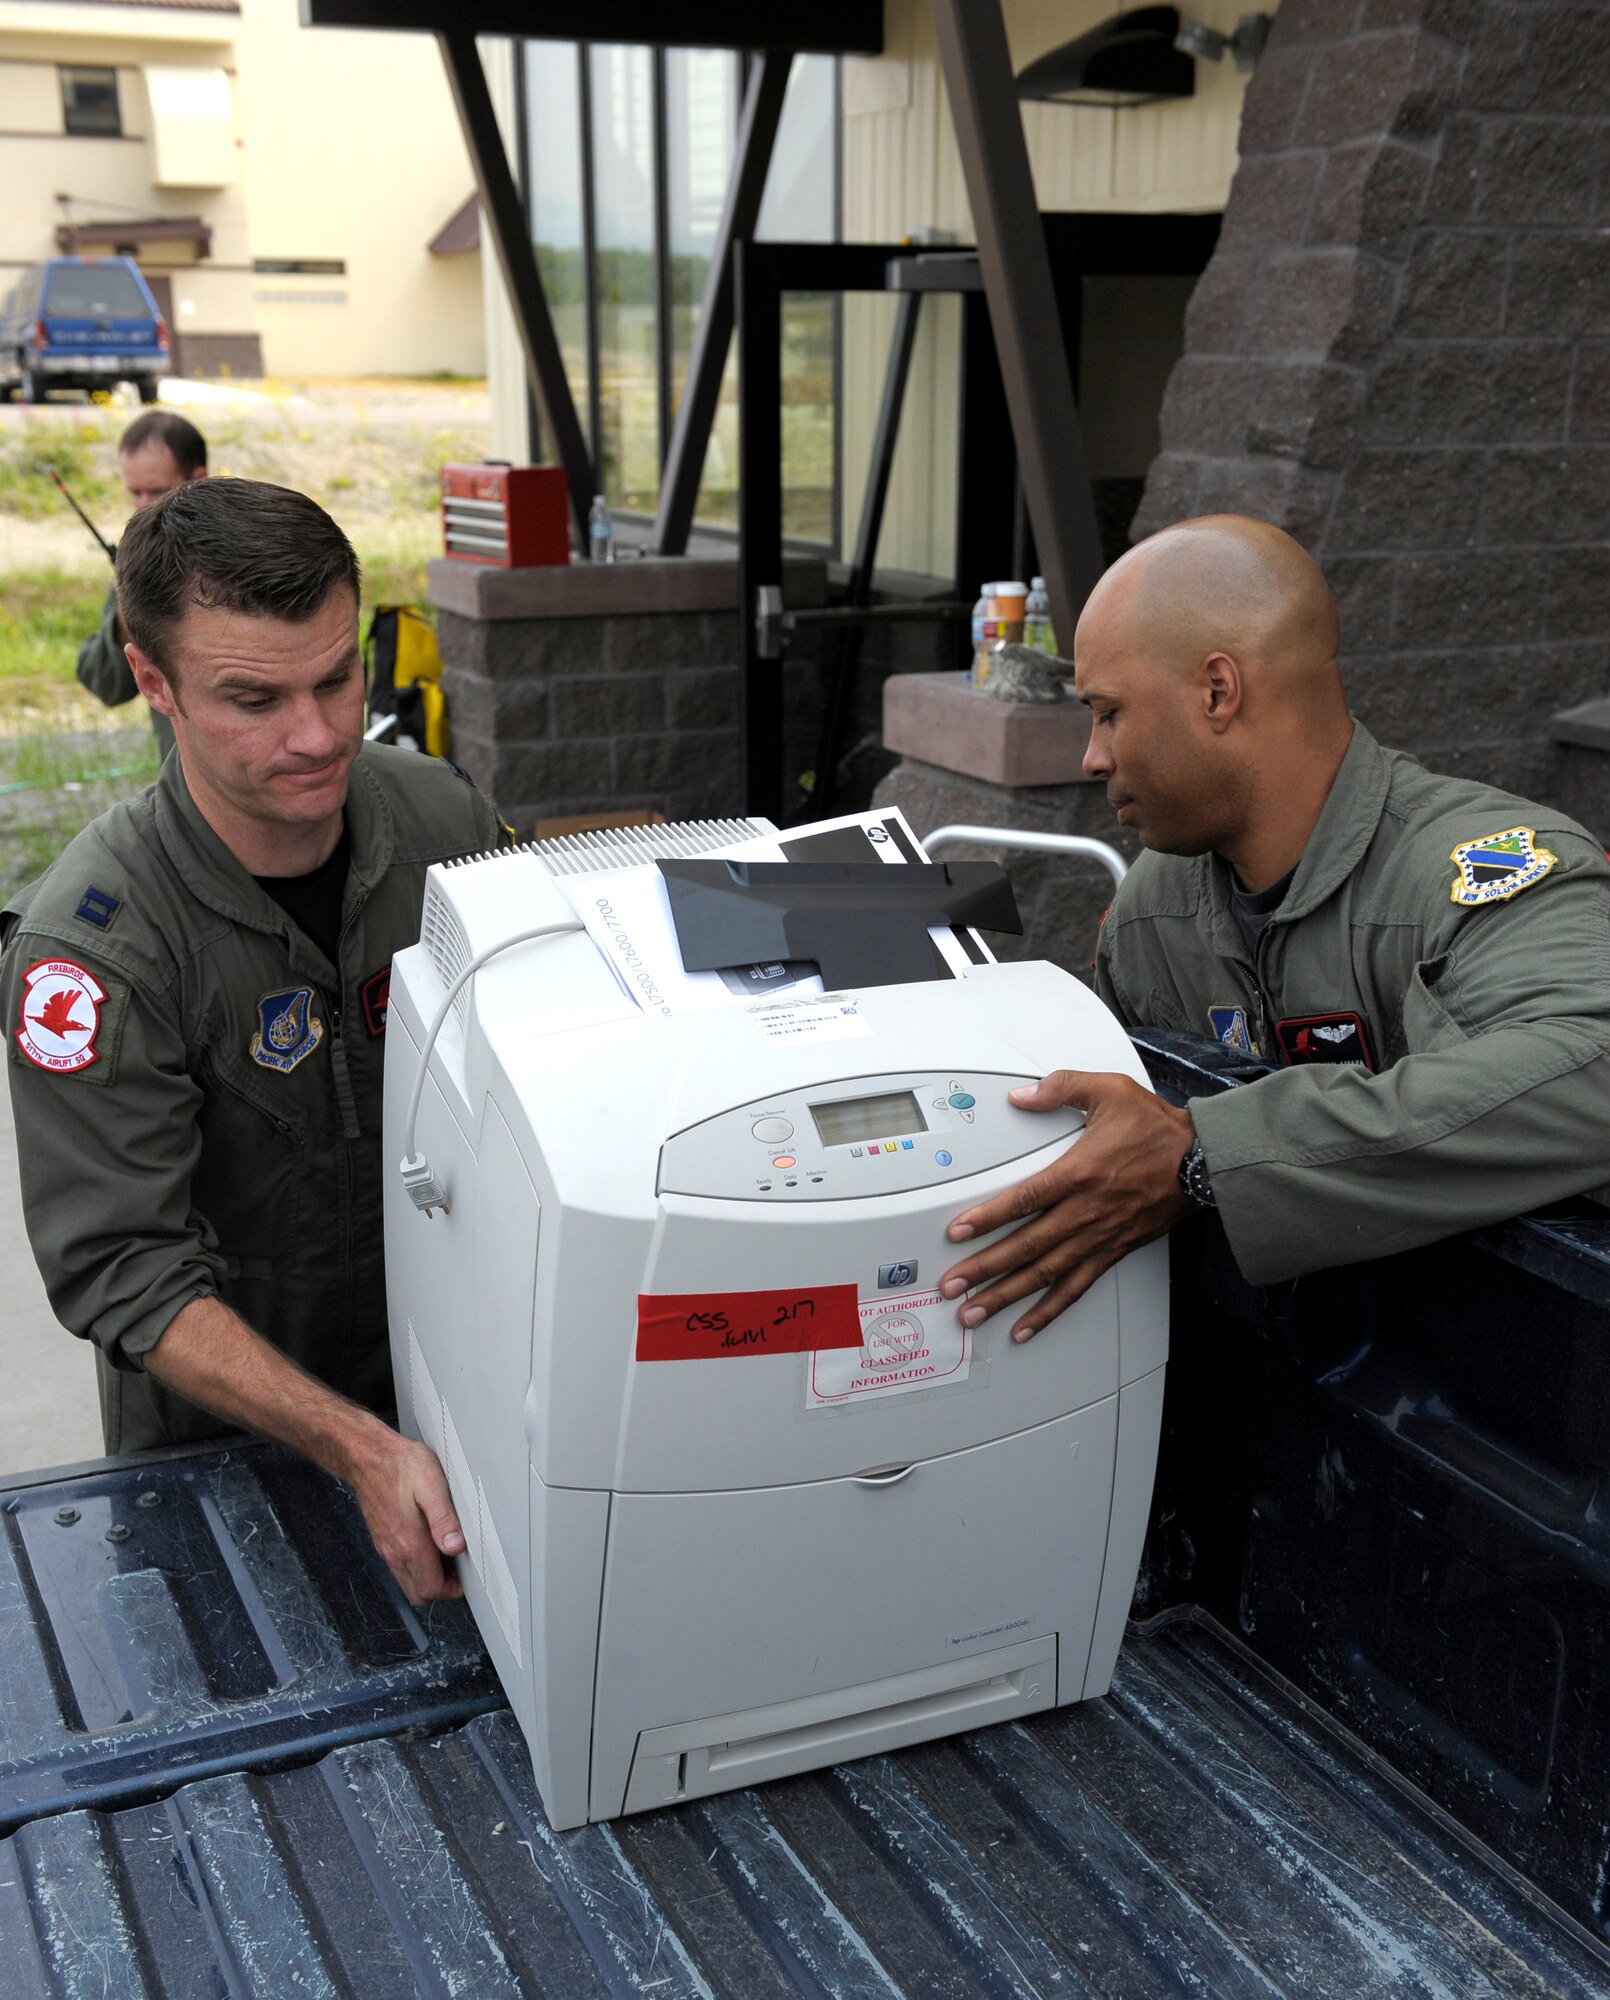 ELMENDORF AIR FORCE BASE, Alaska -- Capt. Reid Wynans and Staff Sgt. Bryan Amaya pick up a printer to carry into the 517th Airlift Squadron's new facility July 7. The squadron moved from Hangar 18 to Hangar 21. Wynans and Amaya are members of the 517th AS. (U.S. Air Force photo/Master Sgt. Keith Brown)